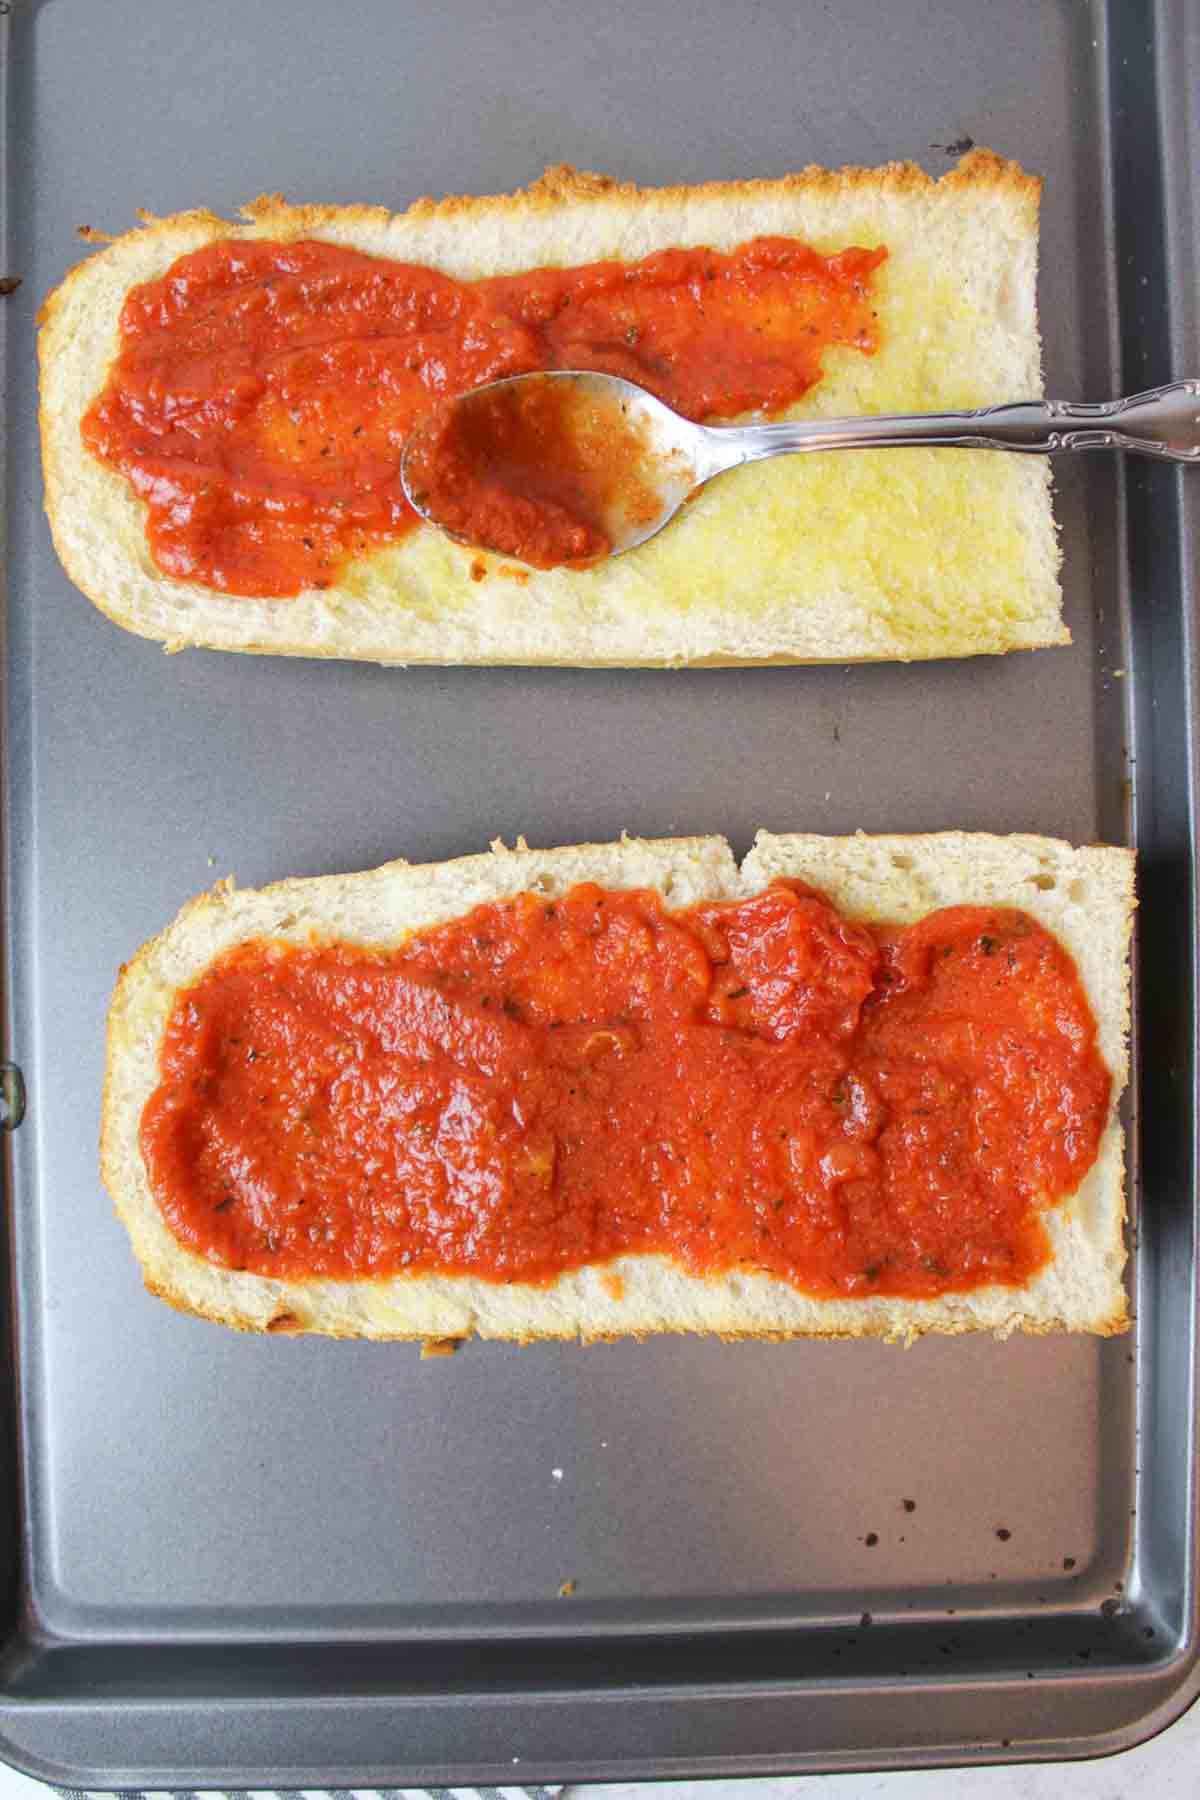 spread pizza sauce on the french bread to make pizza